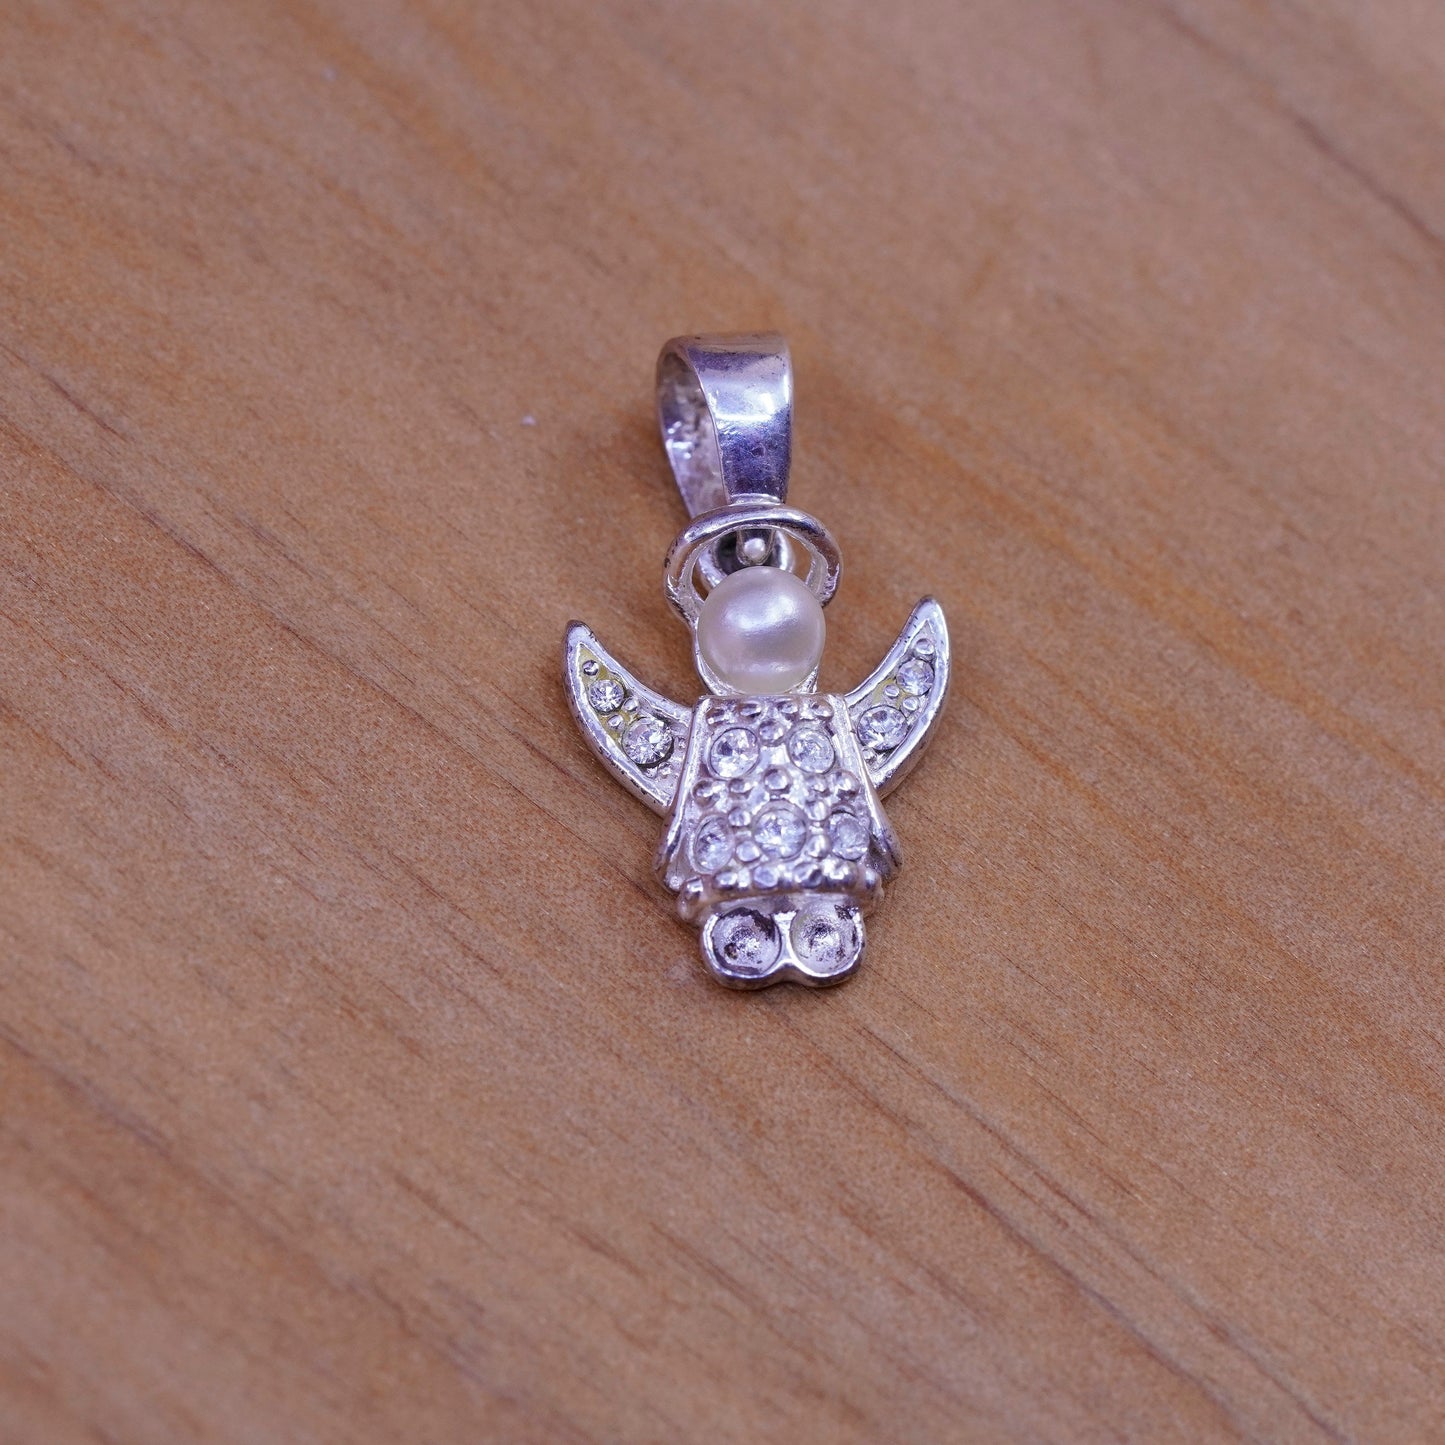 Vintage Sterling silver handmade pendant, 925 angel charm with crystal